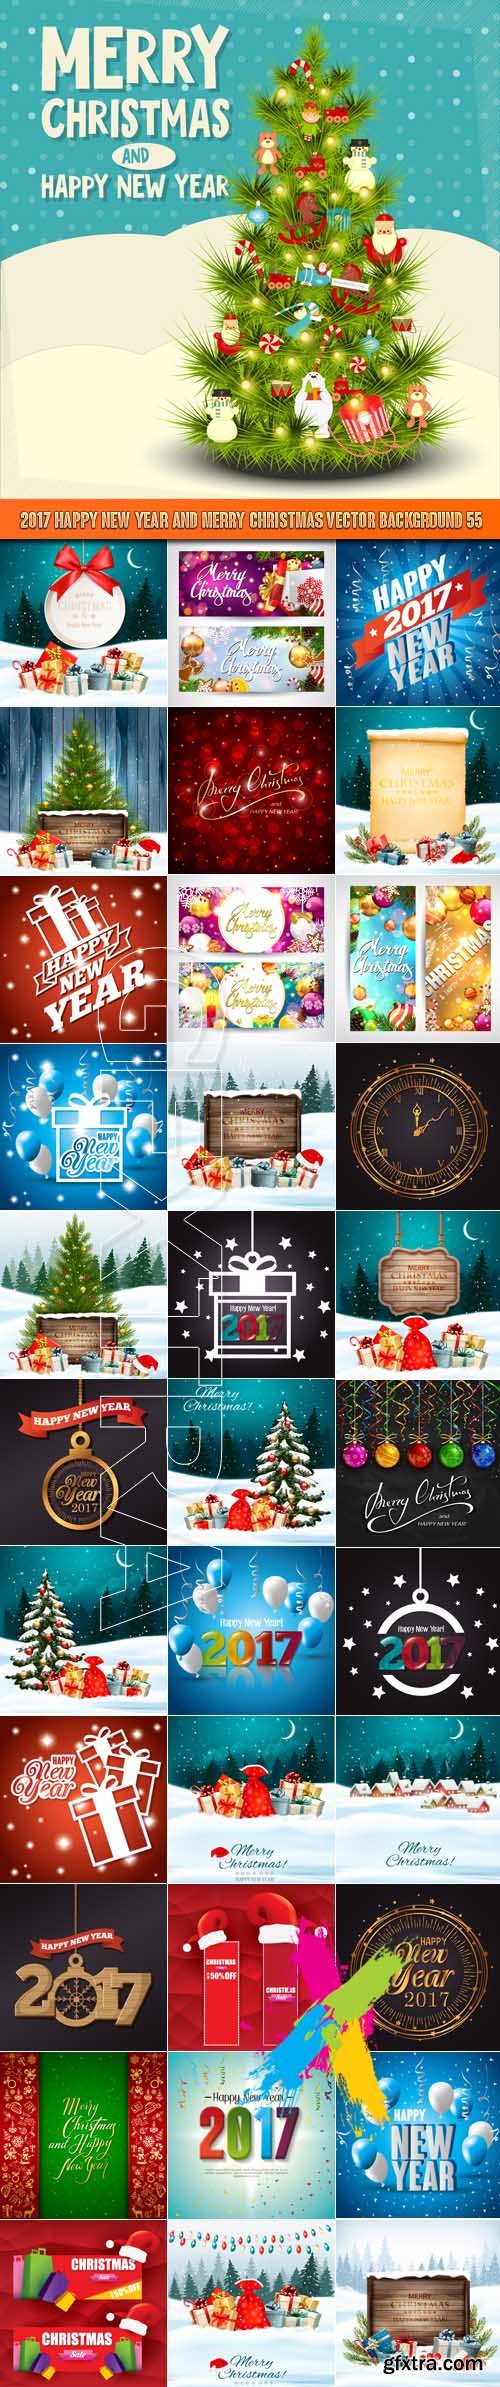 2017 Happy New Year and Merry Christmas vector background 55